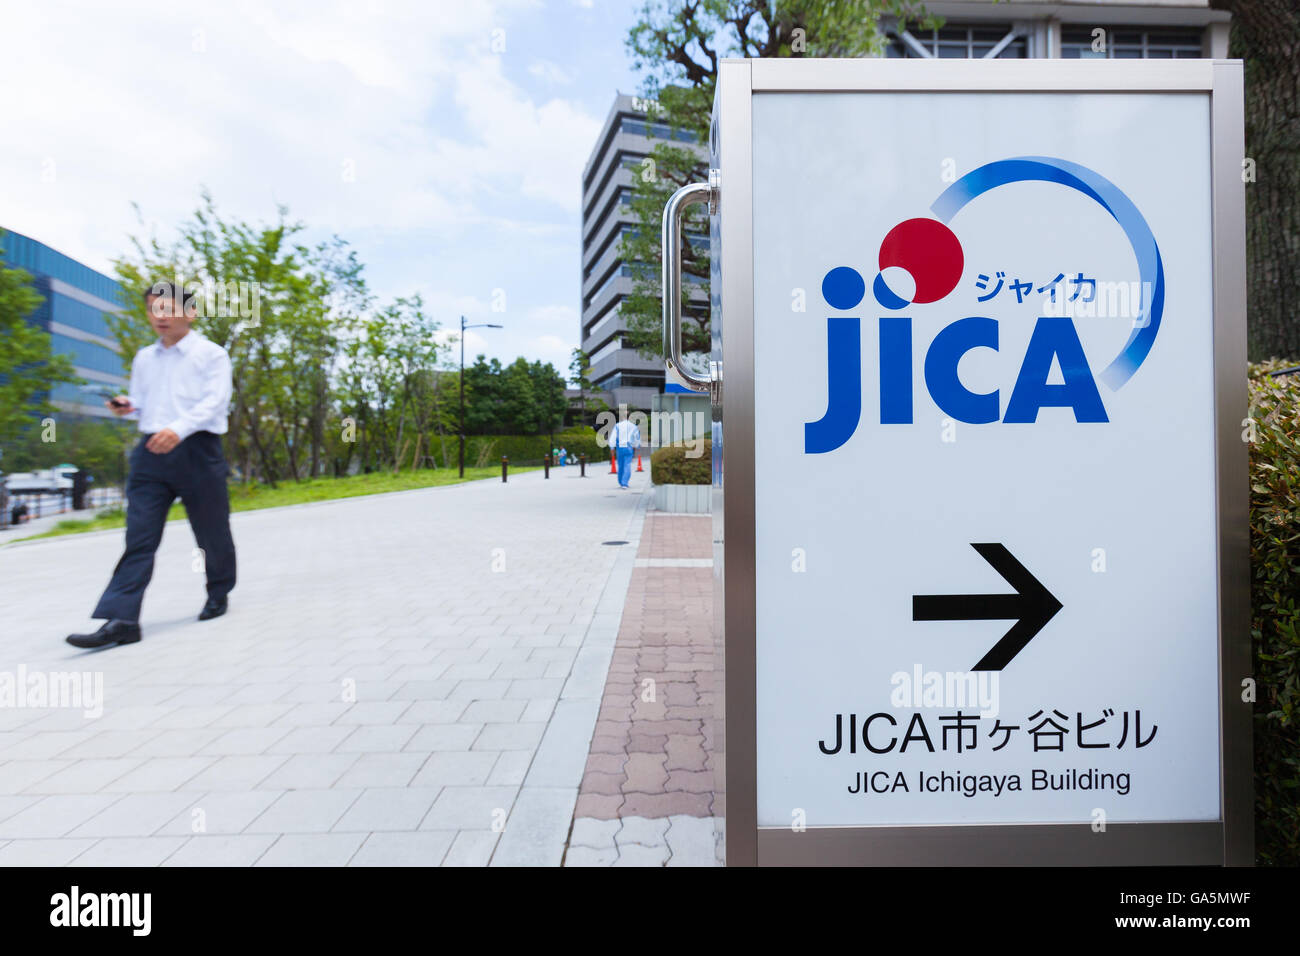 A man walks past a JICA signboard on display outside its Ichigaya building in Tokyo on July 4, 2016, Japan. Seven Japanese working on a transportation infrastructure project managed by the International Cooperation Agency (JICA) were among 28 who died in a terrorist attack on a cafe in Bangladesh's capital, Dhaka, on July 1st. The Japanese Prime Minister Shinzo Abe expressed his anger over the attack calling it an unforgivable act of terrorism and JICA's President Shinichi Kitaoka also expressed his grief after hearing that seven Japanese had been killed. (Photo by Rodrigo Reyes Marin/AFLO) Stock Photo